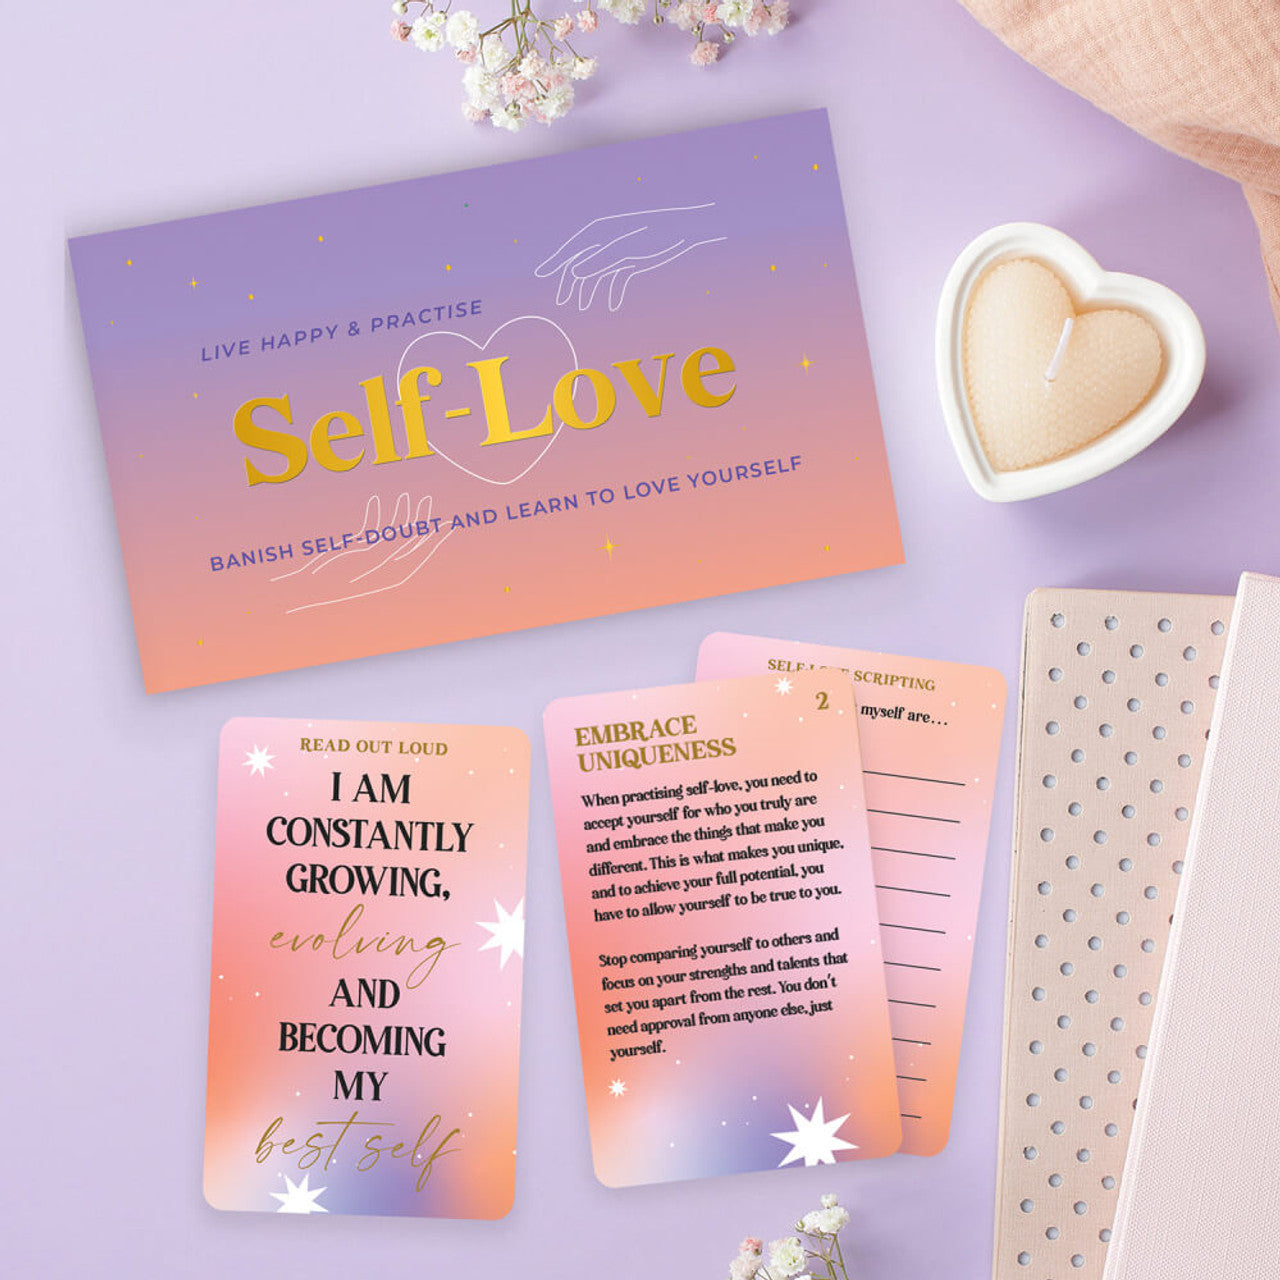 Self-Love Affirmations Card Pack